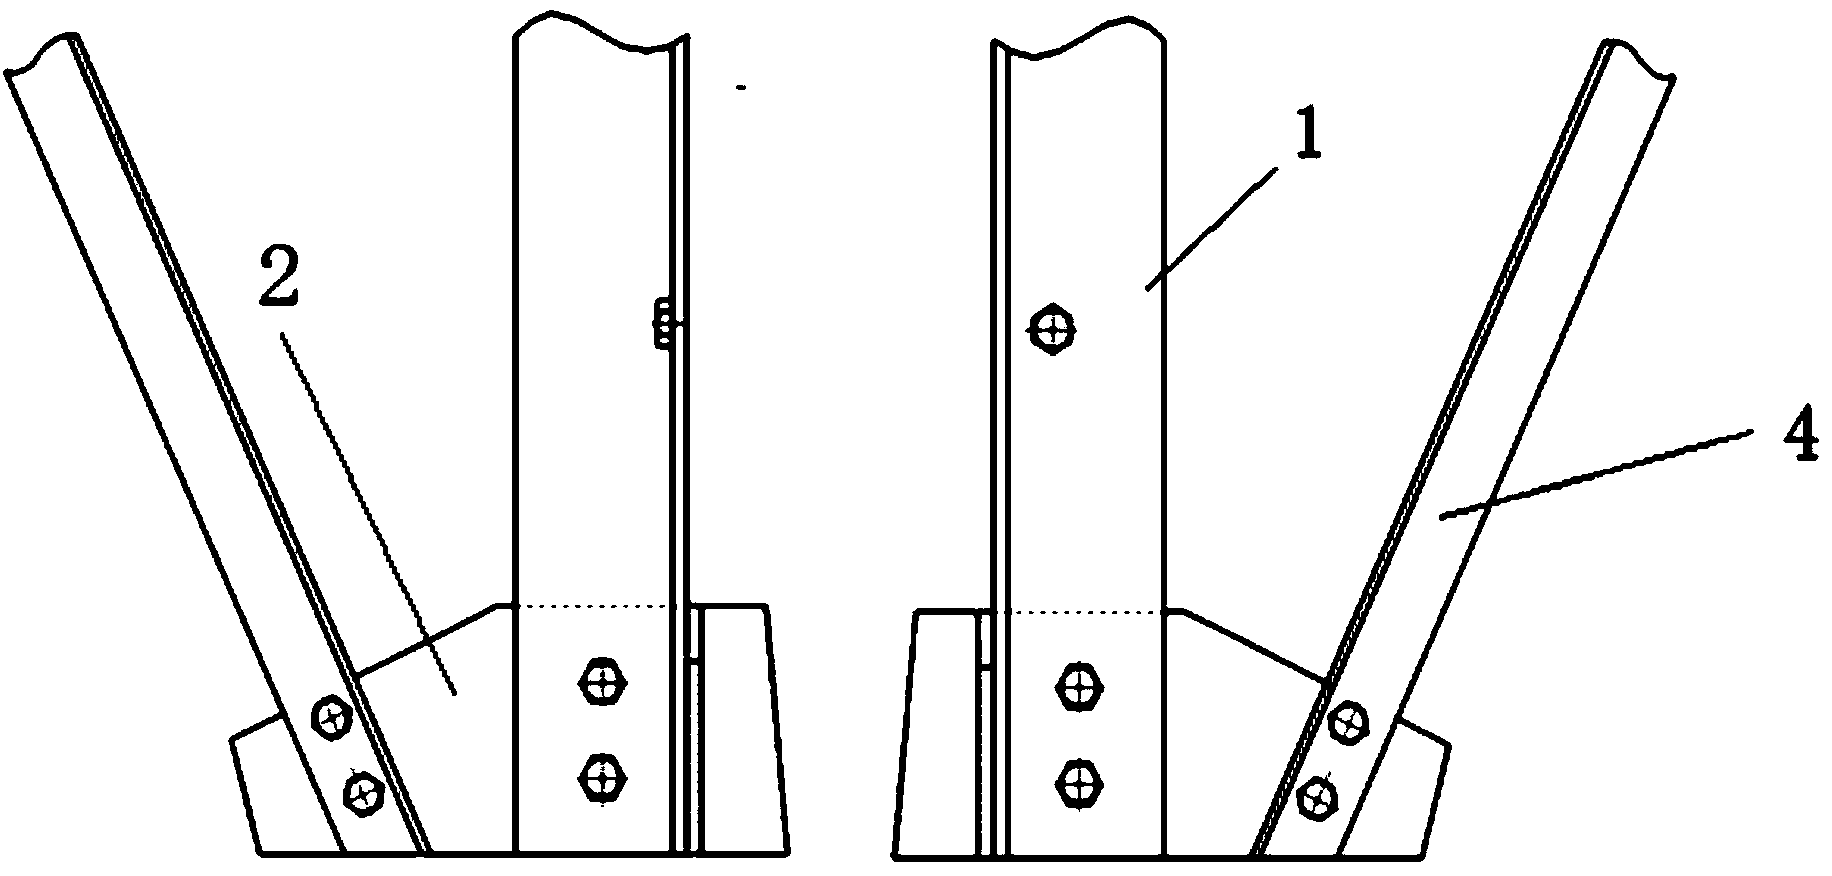 Method for field welding and strengthening of power transmission line steel angle tower leg